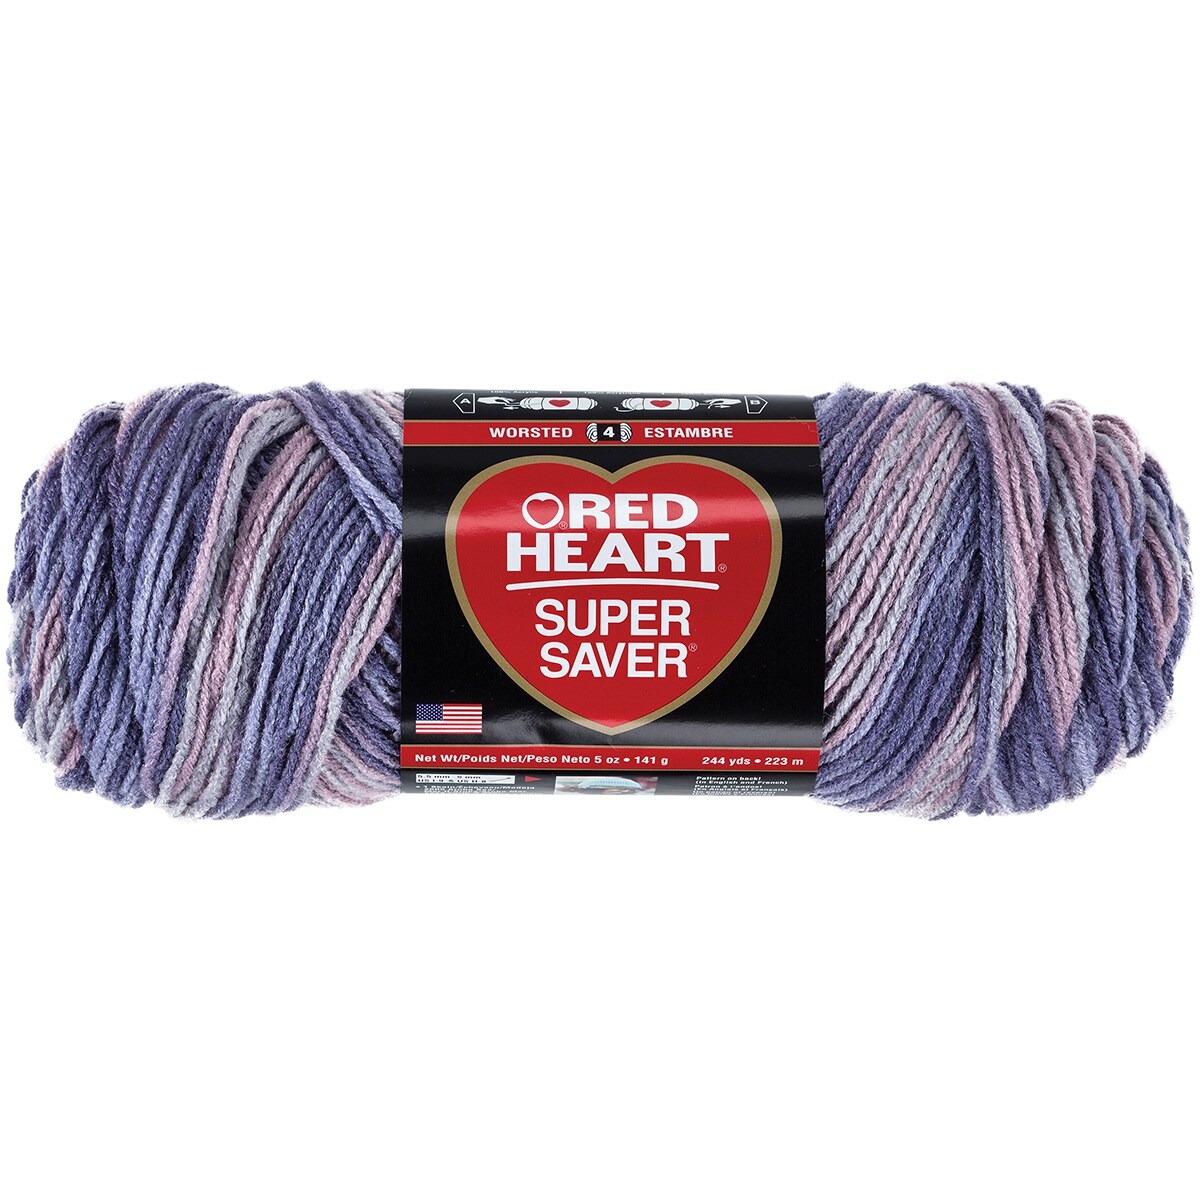 Red Heart Super Saver Mulberry Mix Yarn - 3 Pack of 141g/5oz